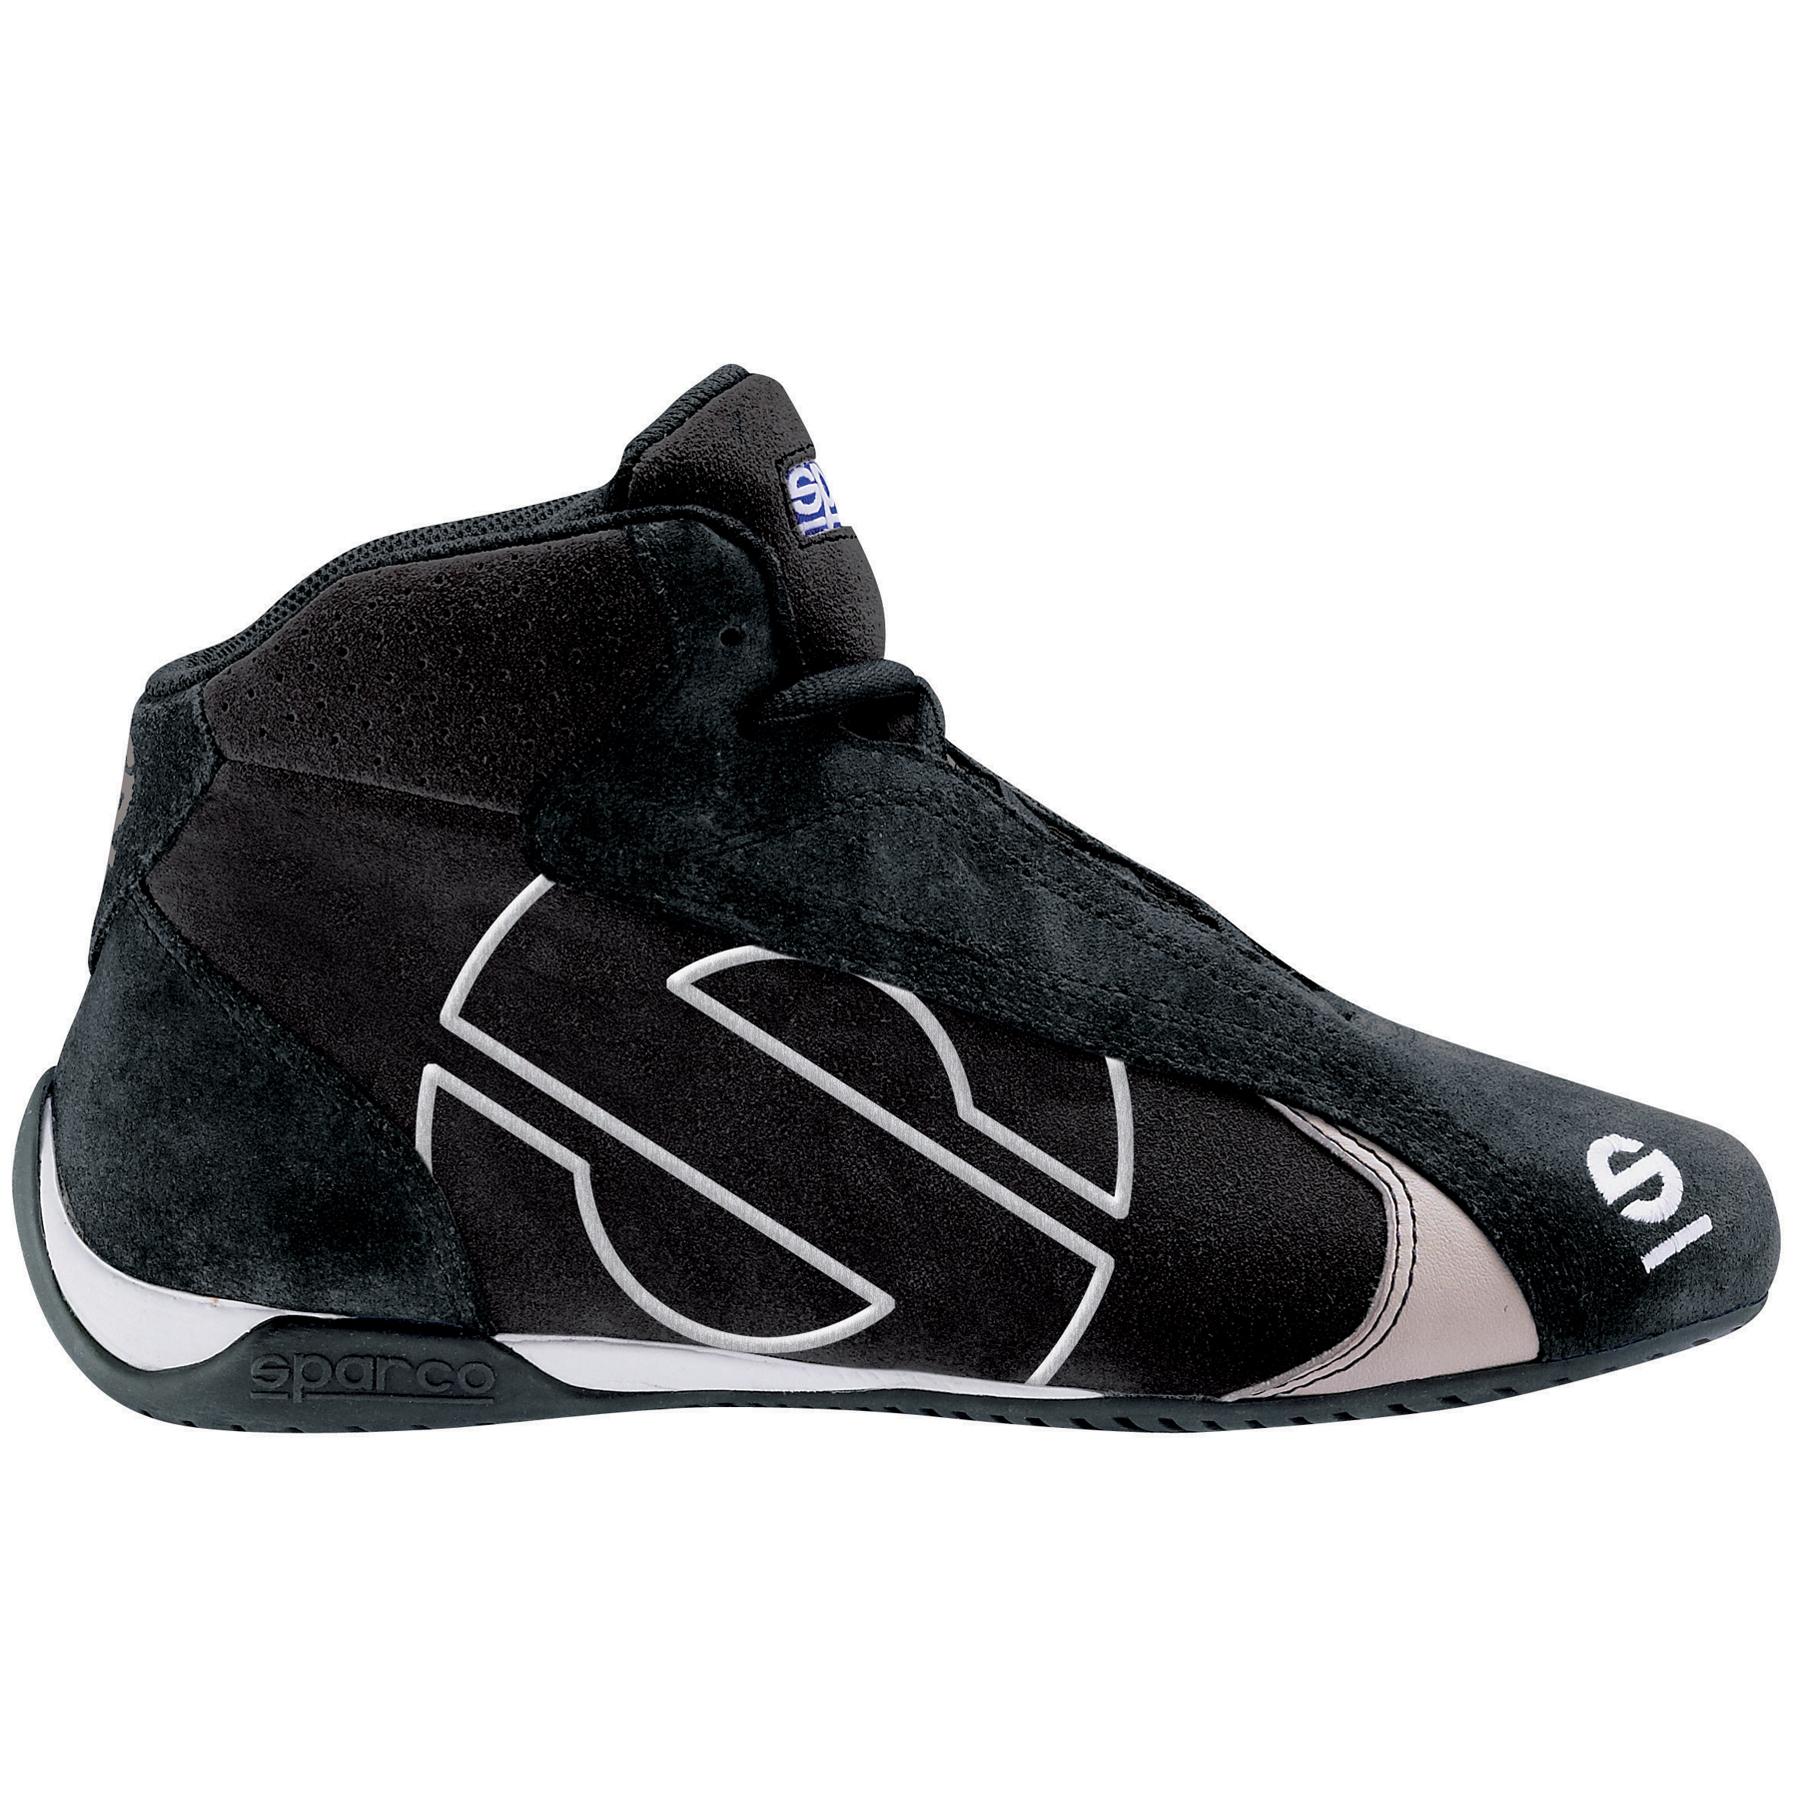 sparco karting boots